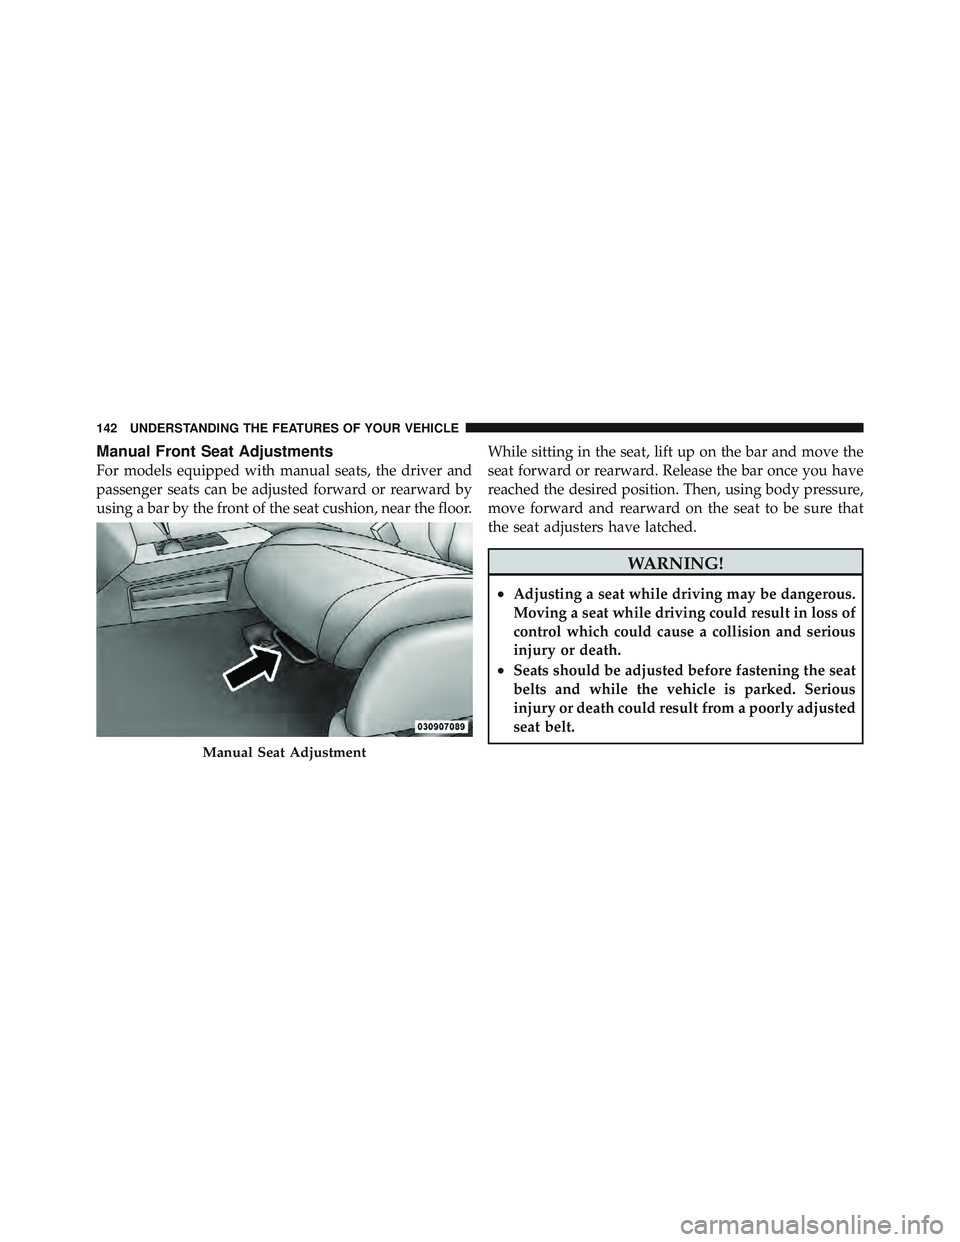 JEEP LIBERTY 2011  Owners Manual Manual Front Seat Adjustments
For models equipped with manual seats, the driver and
passenger seats can be adjusted forward or rearward by
using a bar by the front of the seat cushion, near the floor.